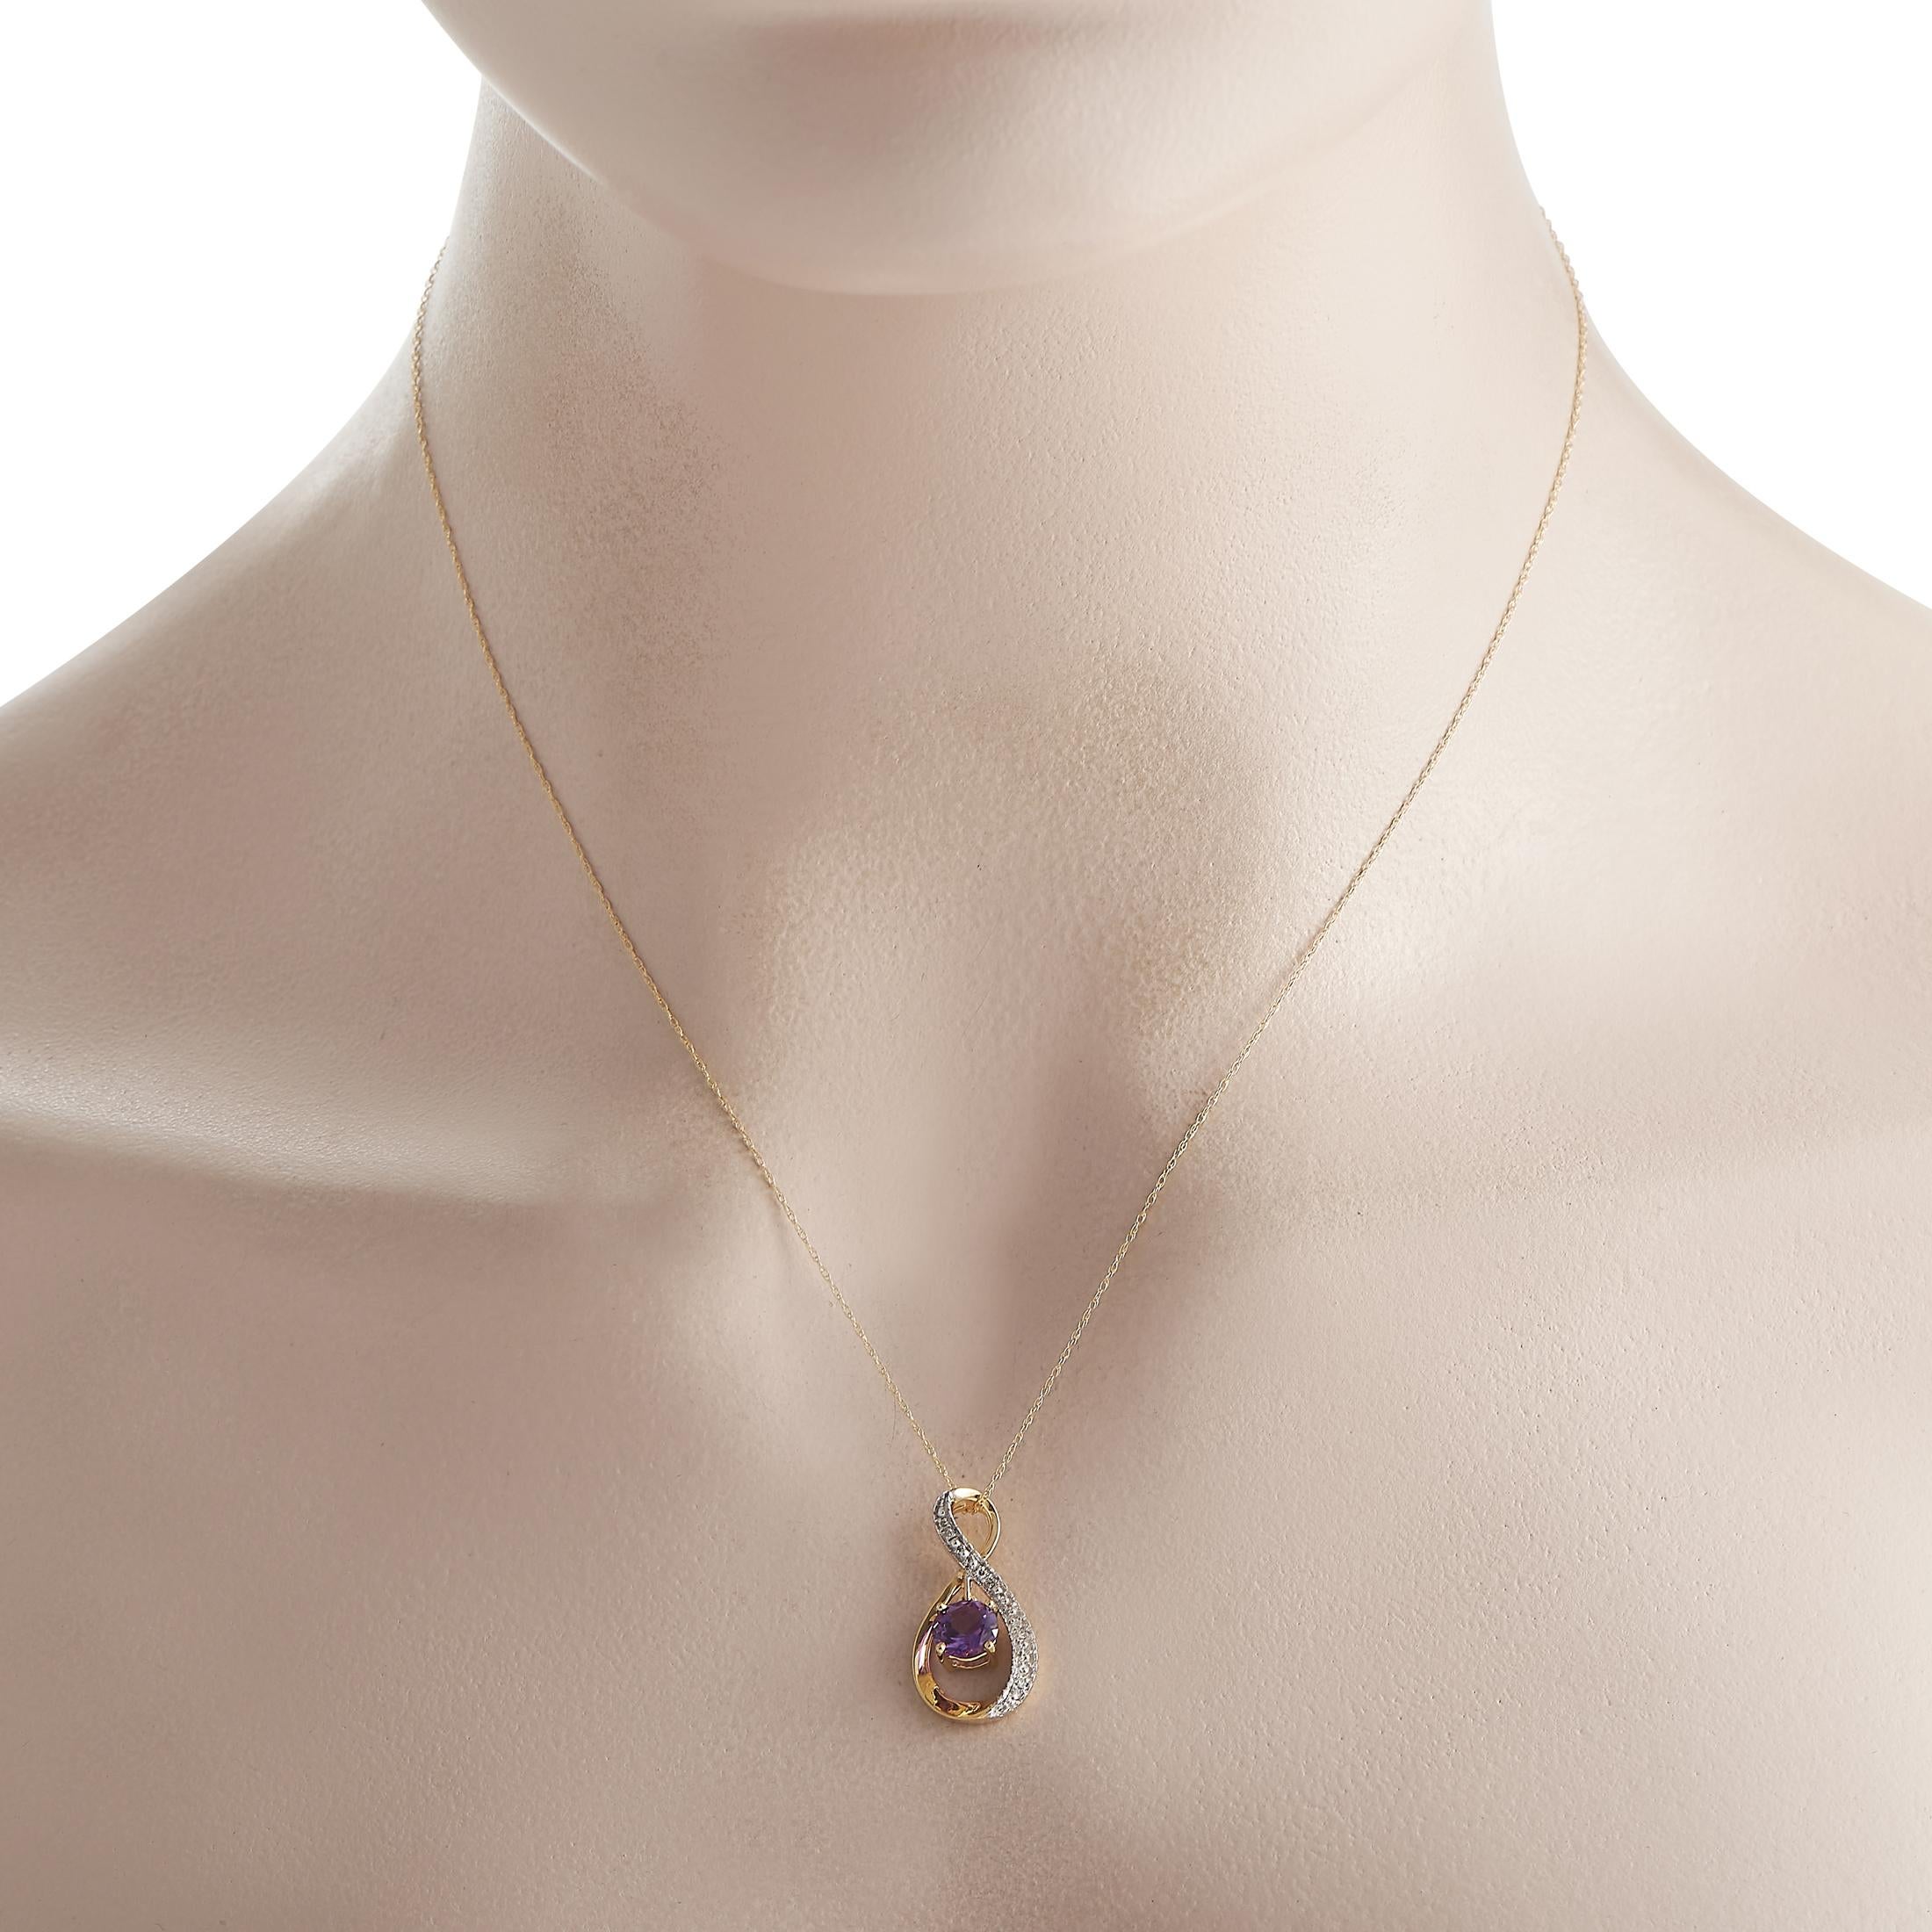 A charming necklace for a February-born. This piece is crafted in 14K yellow gold and has a thin, double cable chain holding a 0.75 by 0.45 looped-style pendant. The figure-8 pendant is decorated with a short line of petite round diamonds and a